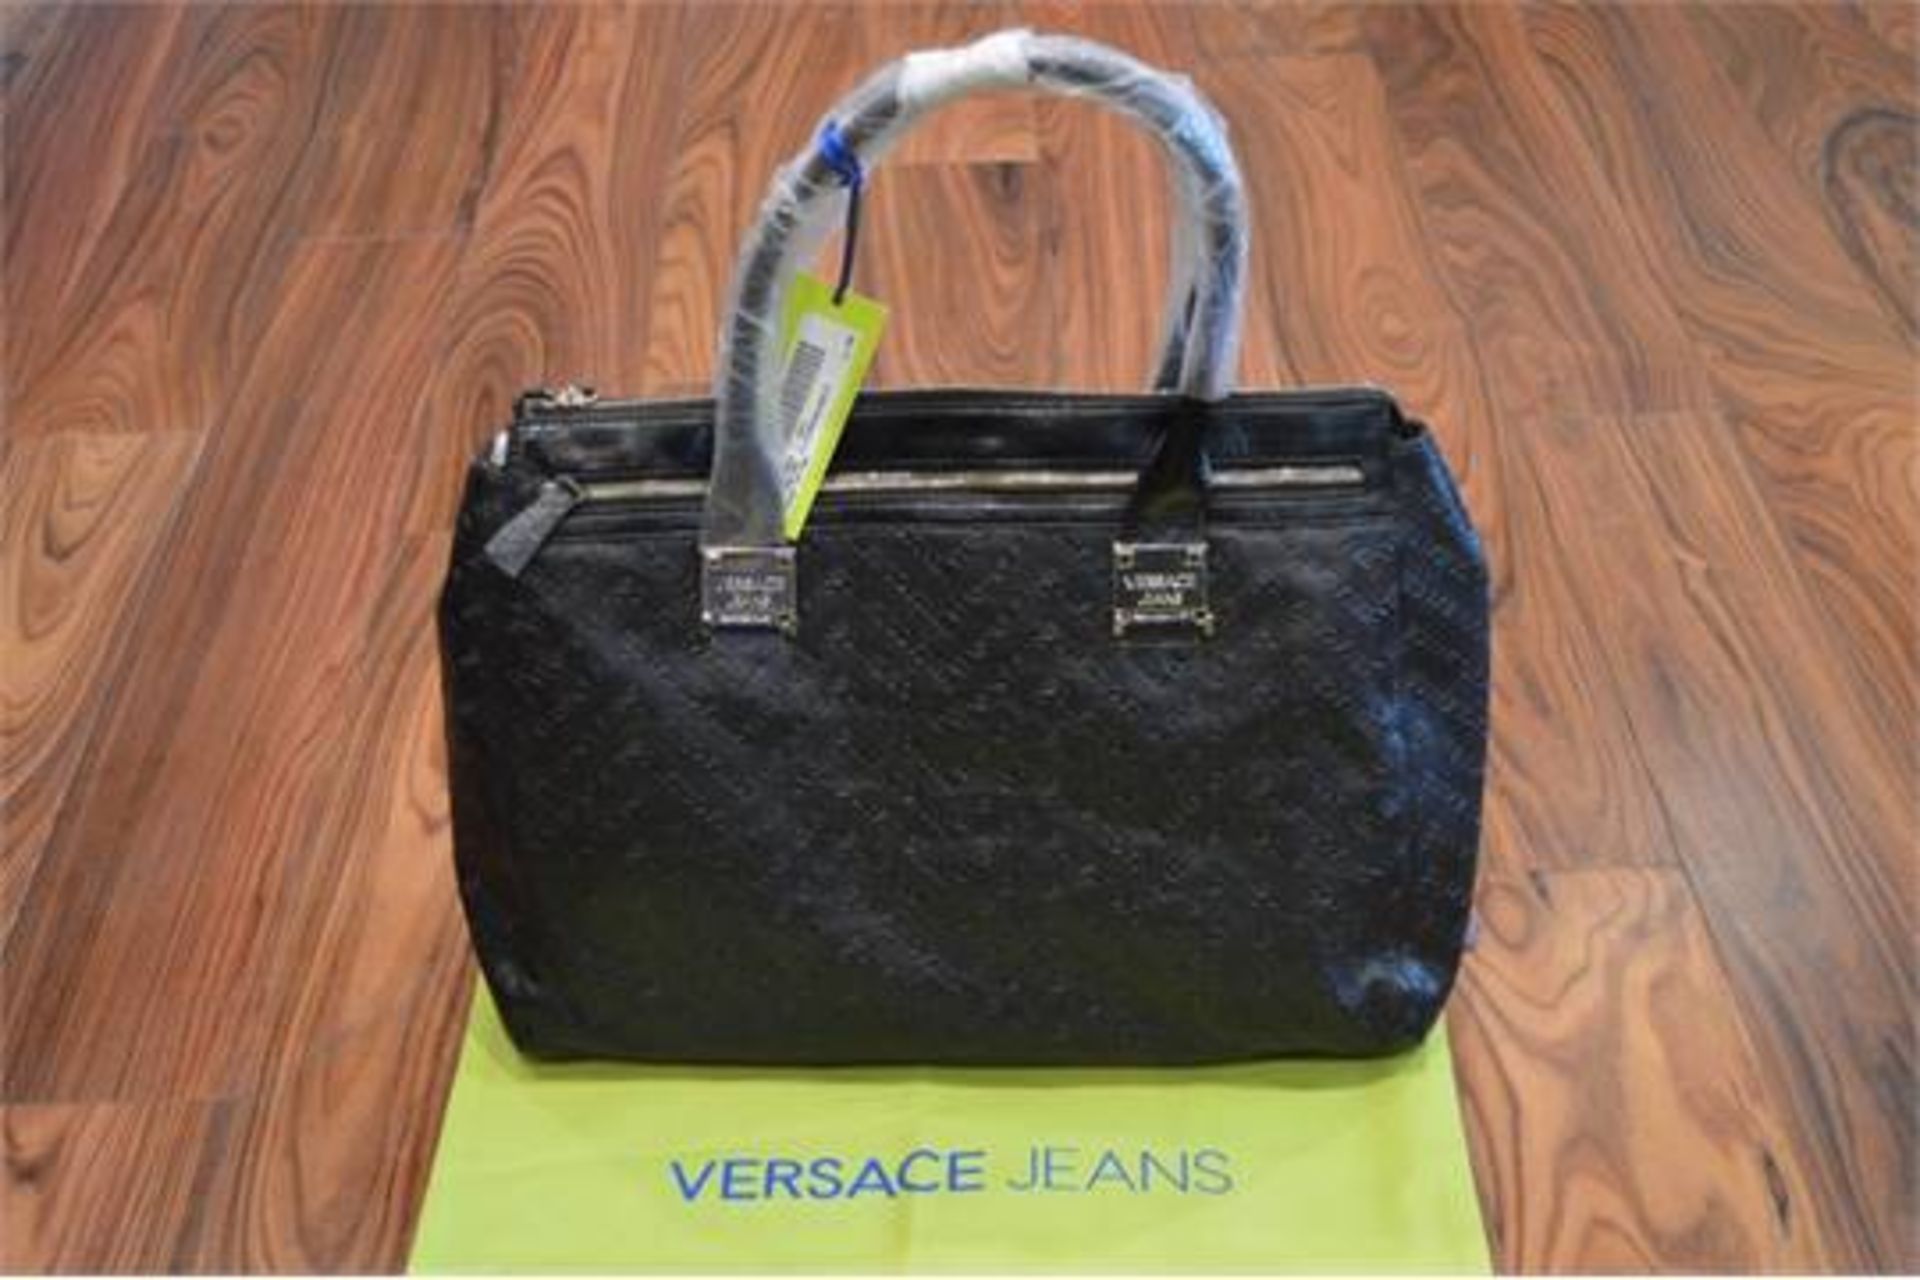 BOXED BRAND NEW WITH LABELS VERSACE JEANS PU PERSONALIZA BLACK LEATHER LOGO PRINT DESIGNER HIGH